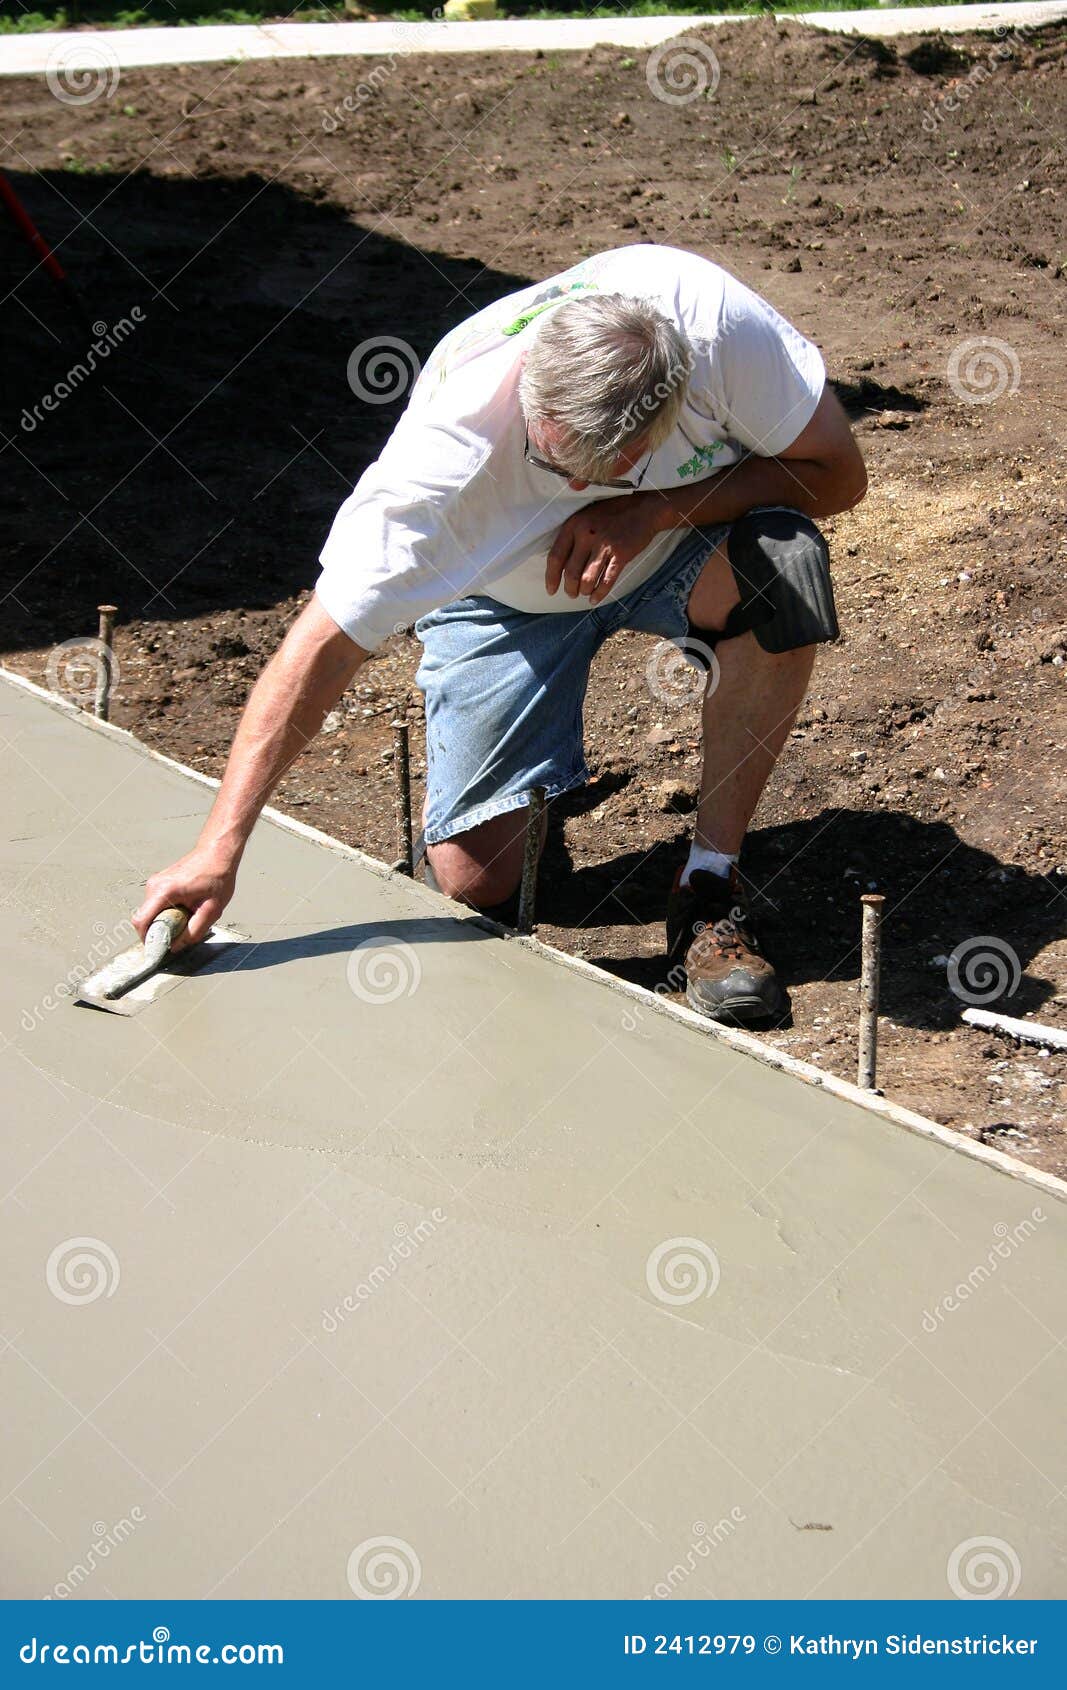 Concrete Finisher With Trowel Kneeling Royalty Free Stock Images